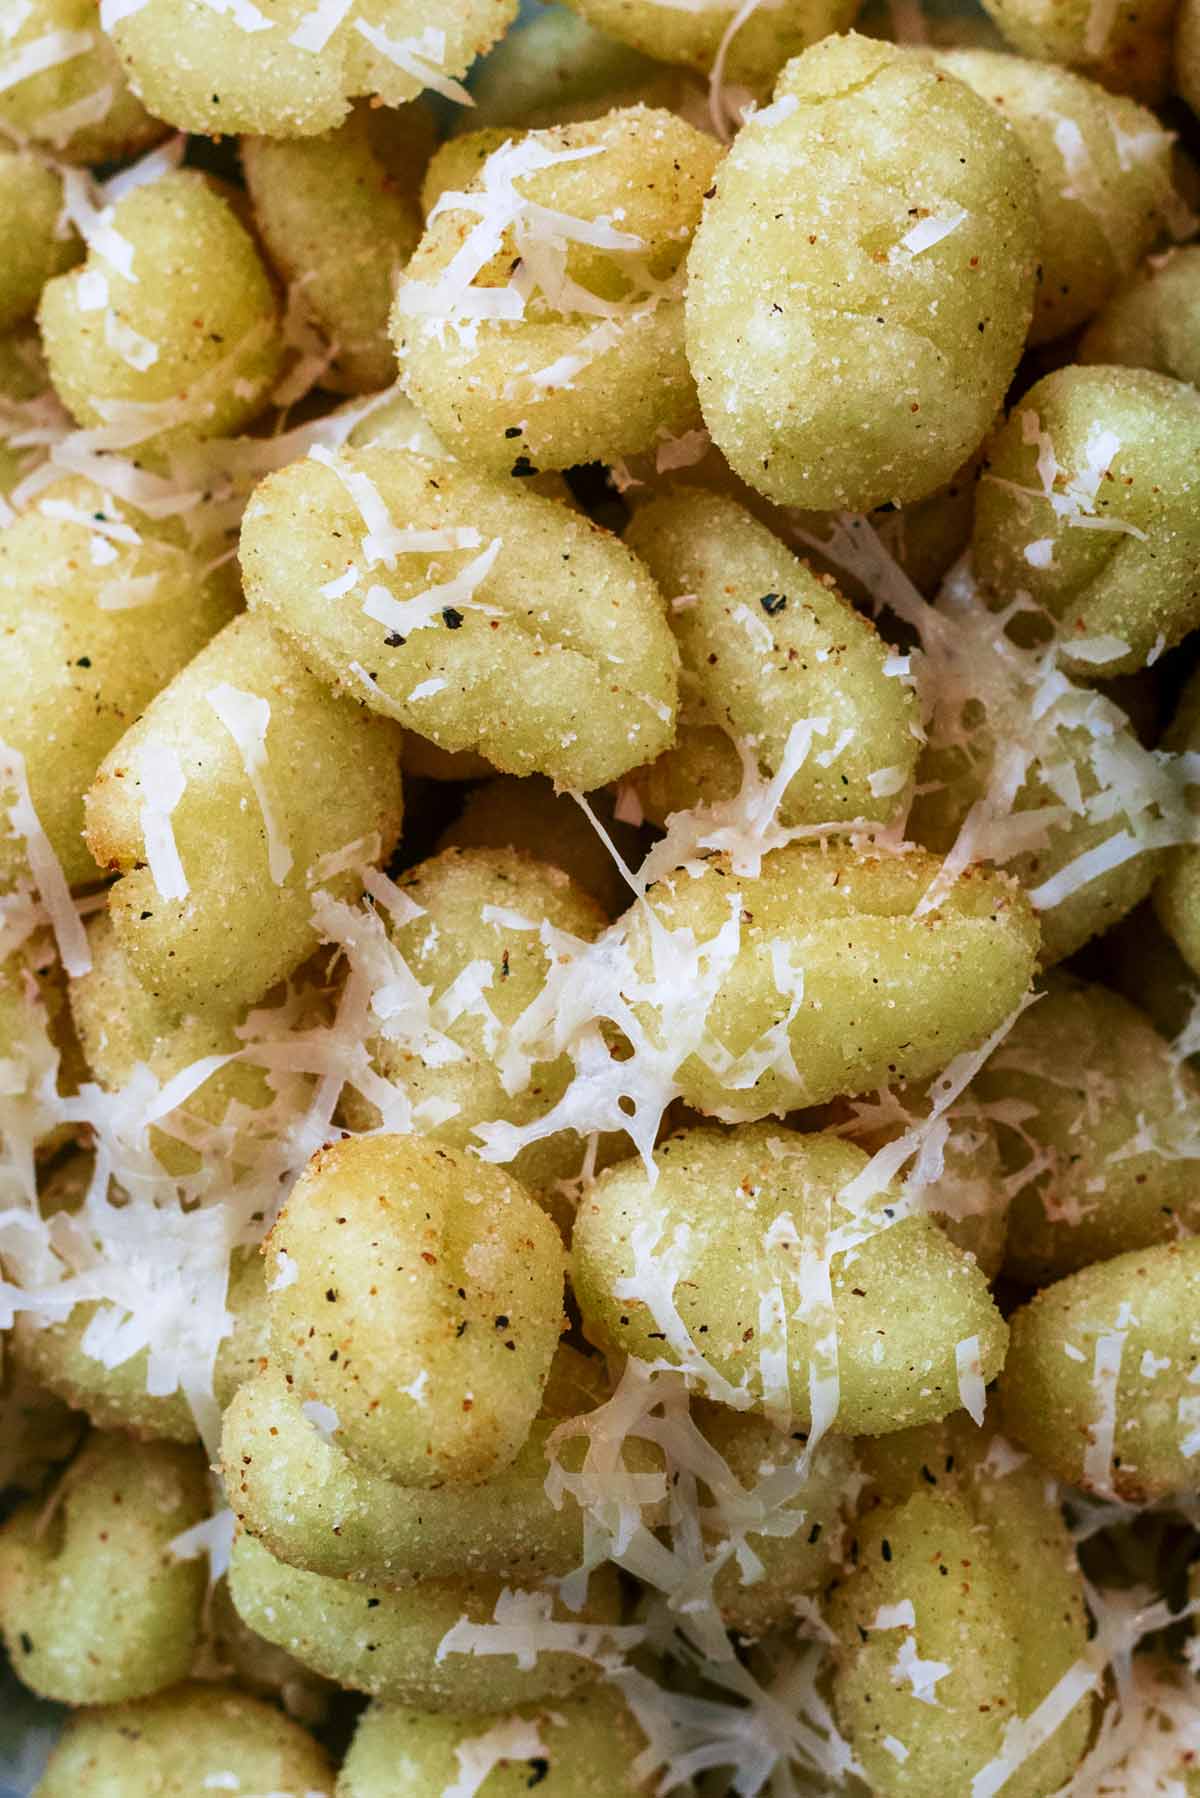 Cooked gnocchi with shavings of Parmesan melting on it.